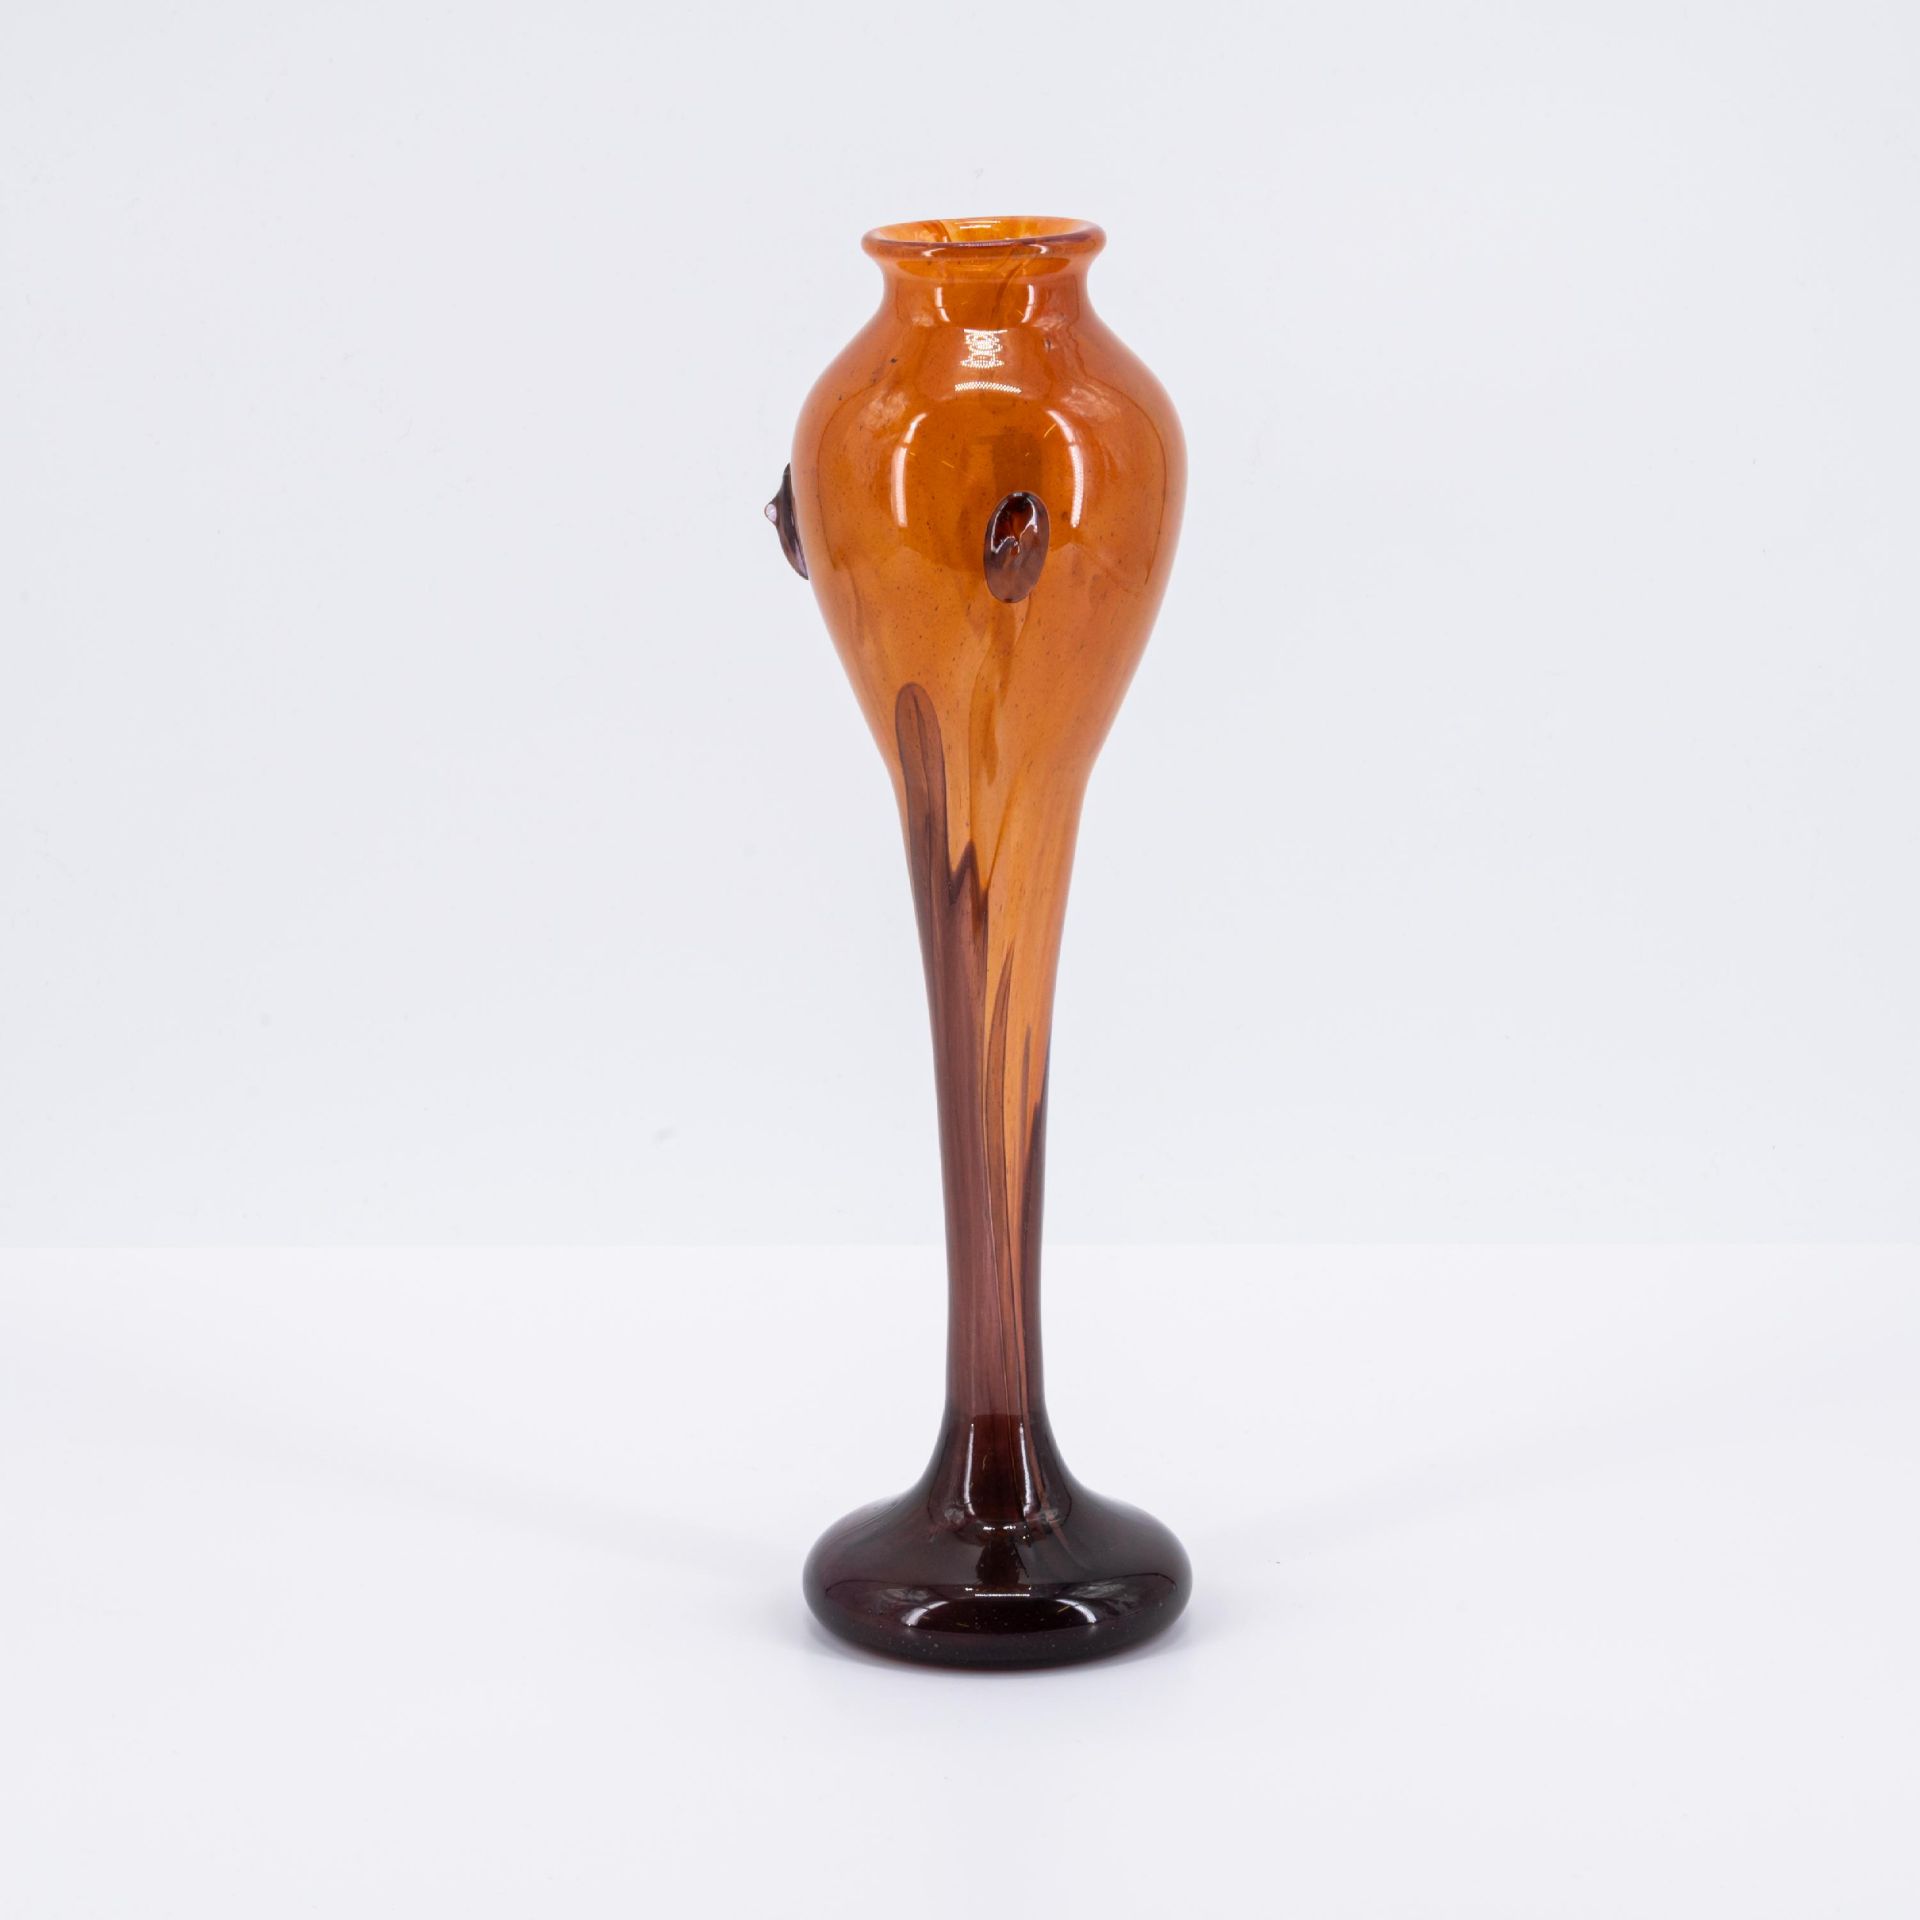 Slim baluster vase with studs - Image 2 of 7